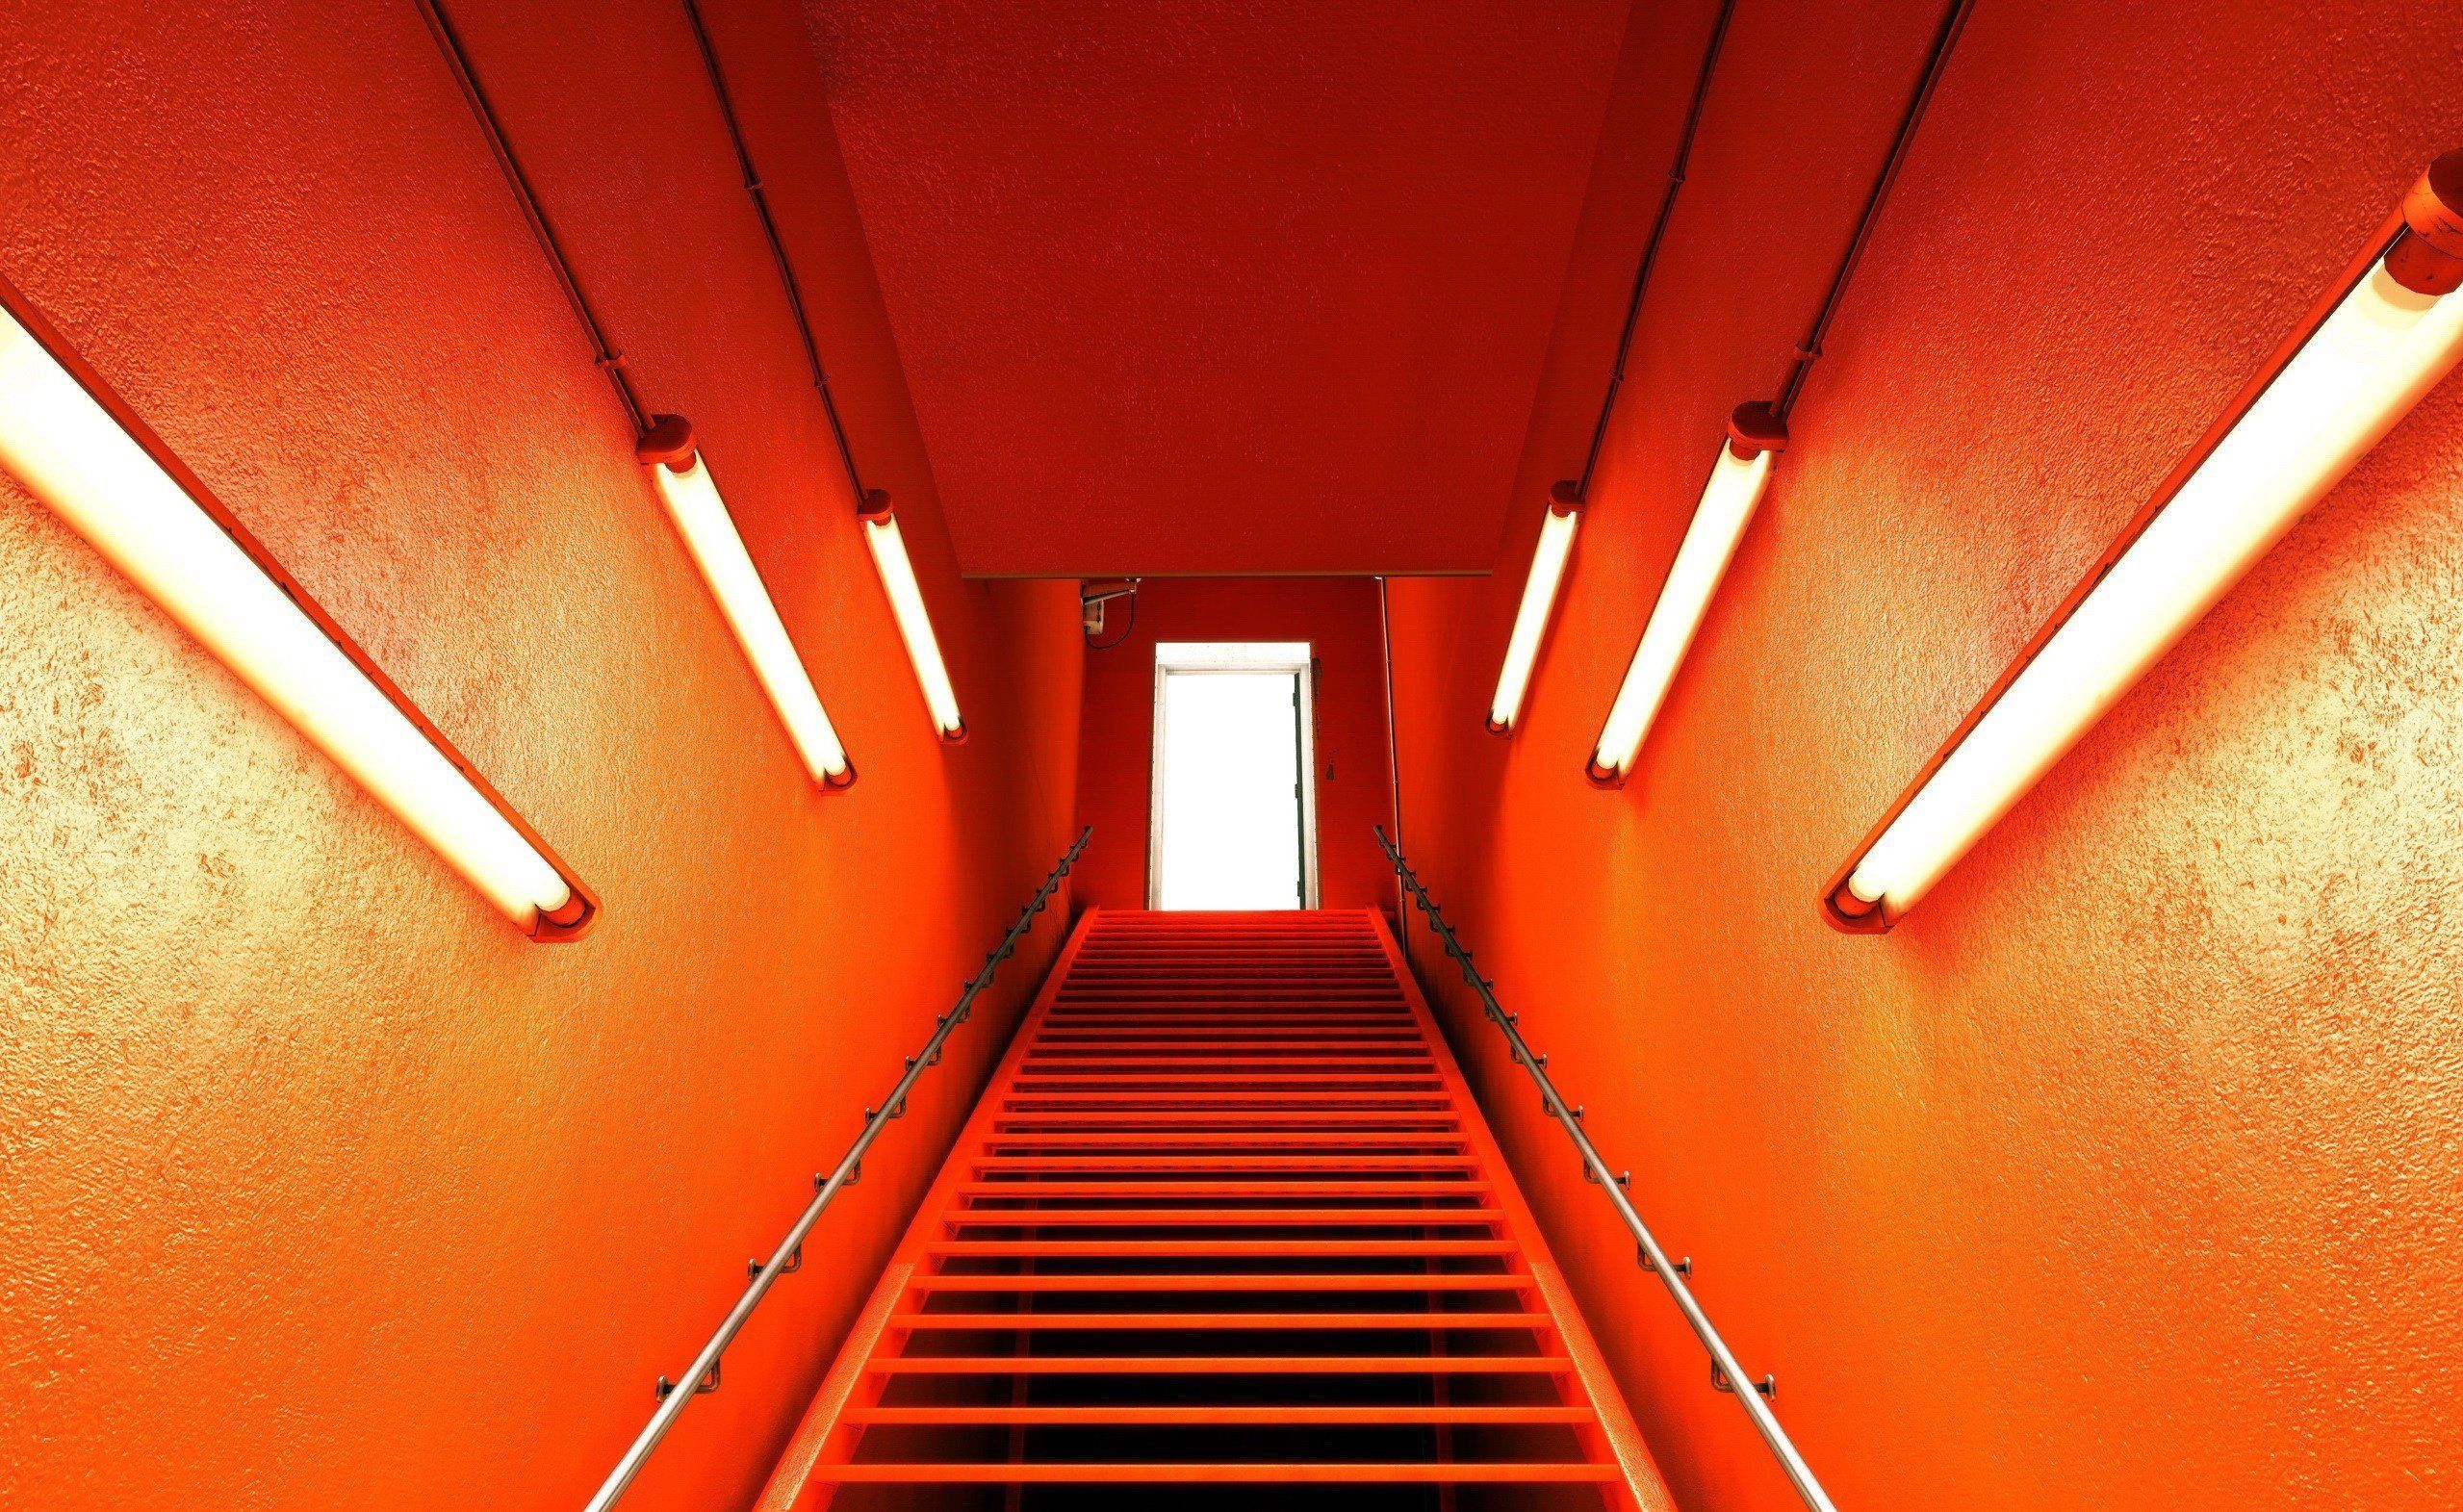 A long orange staircase with a door at the end. - Orange, neon orange